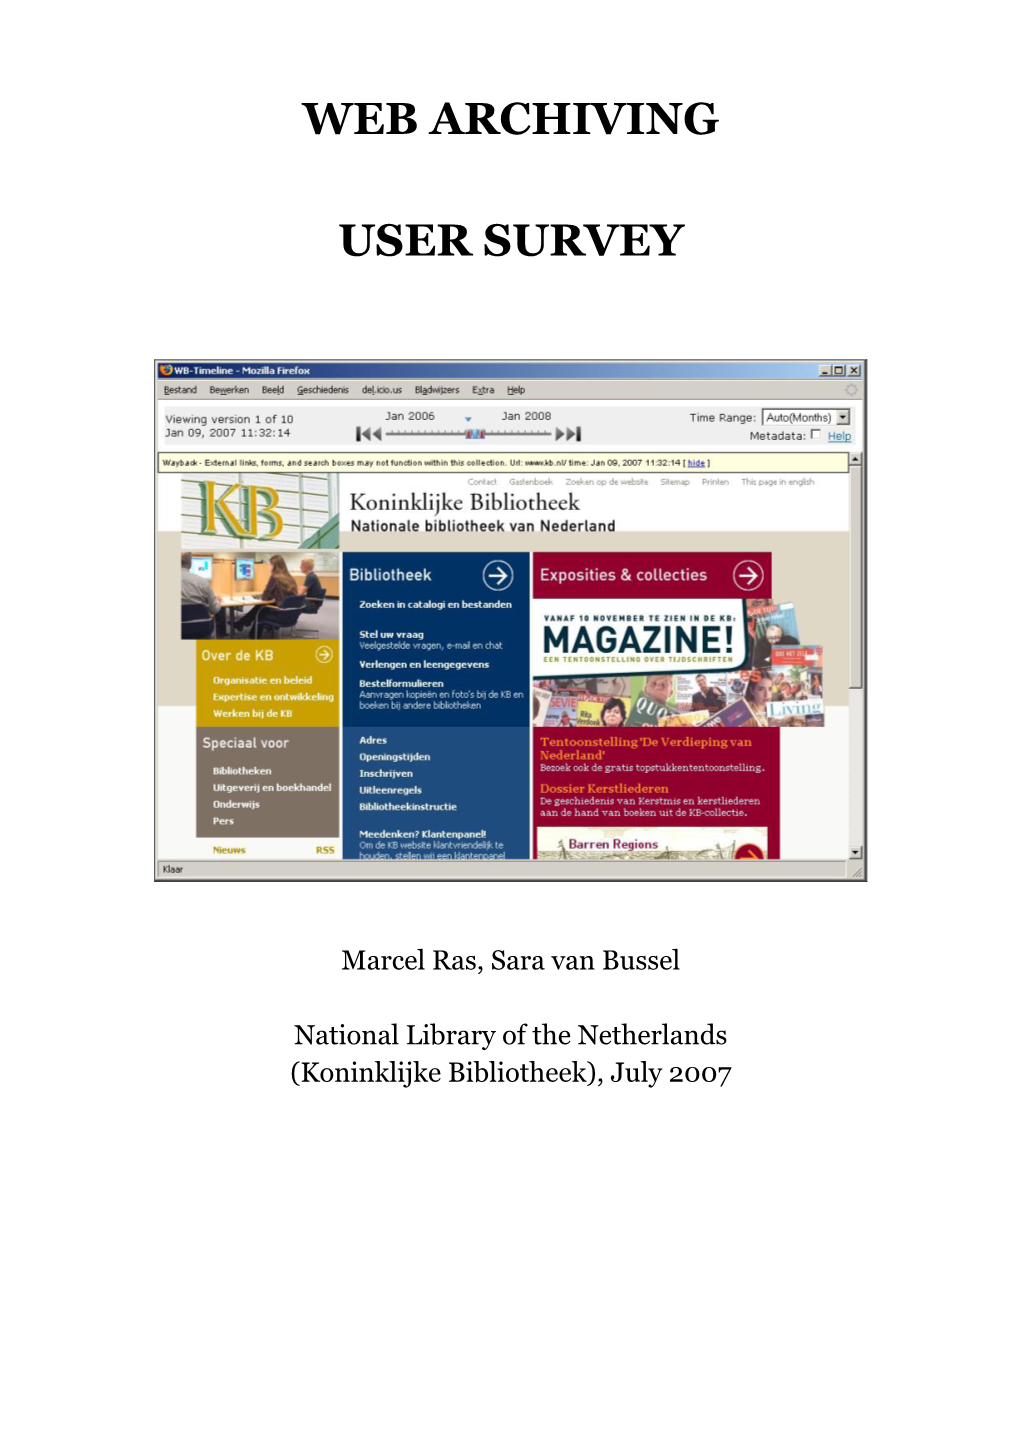 Web Archiving User Survey Because the Customer Satisfaction Survey Clearly Shows Who the Traditional KB Customers Are